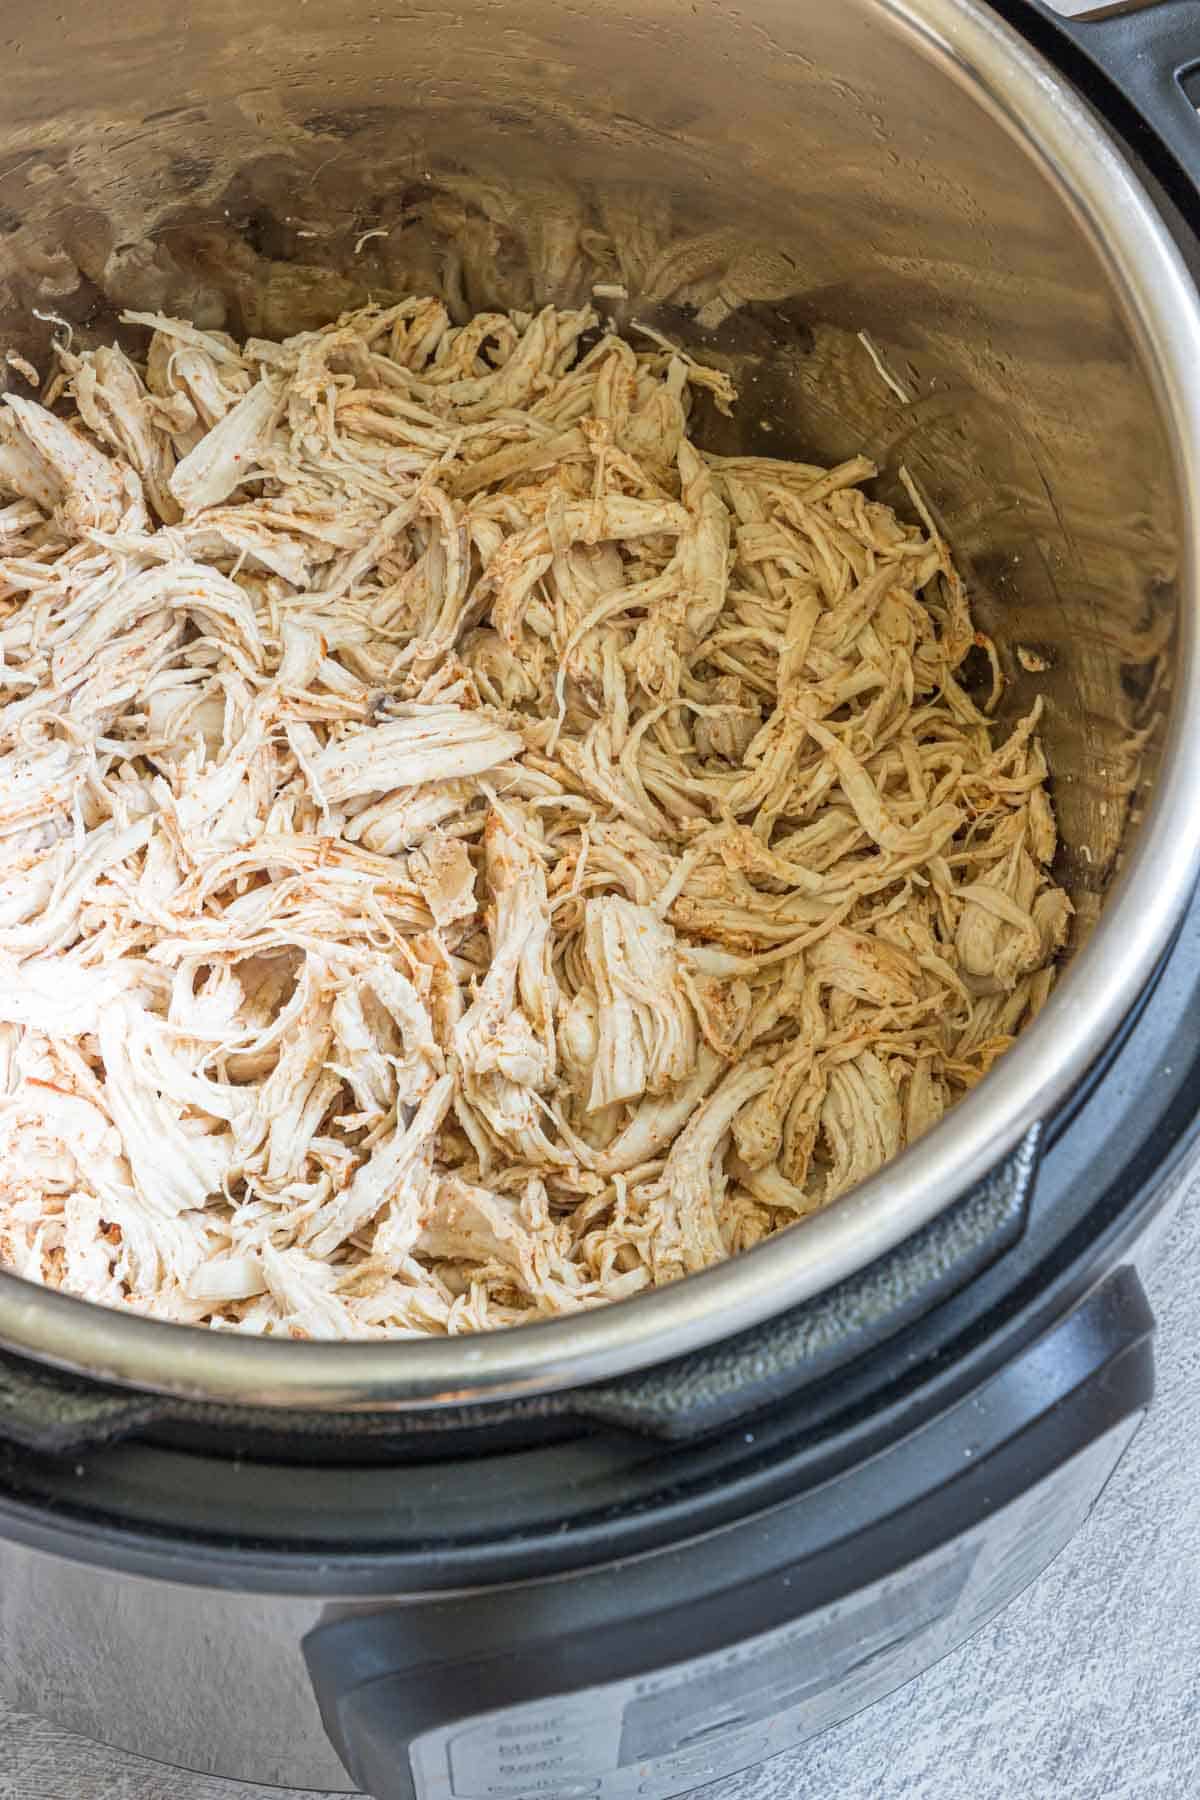 the finished instant pot shredded chicken inside the instant pot